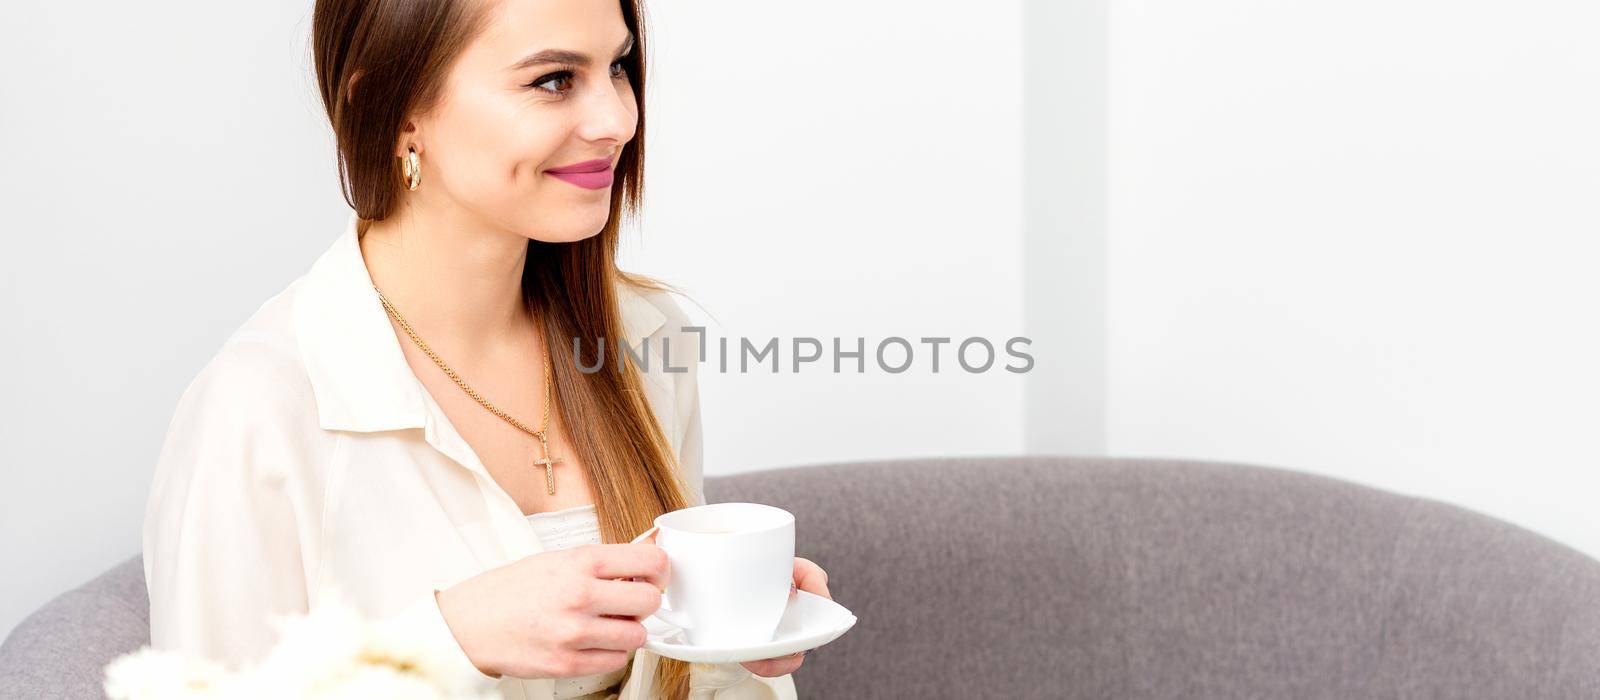 Female caucasian client with a cup of coffee in his hands smiling at a doctor's appointment